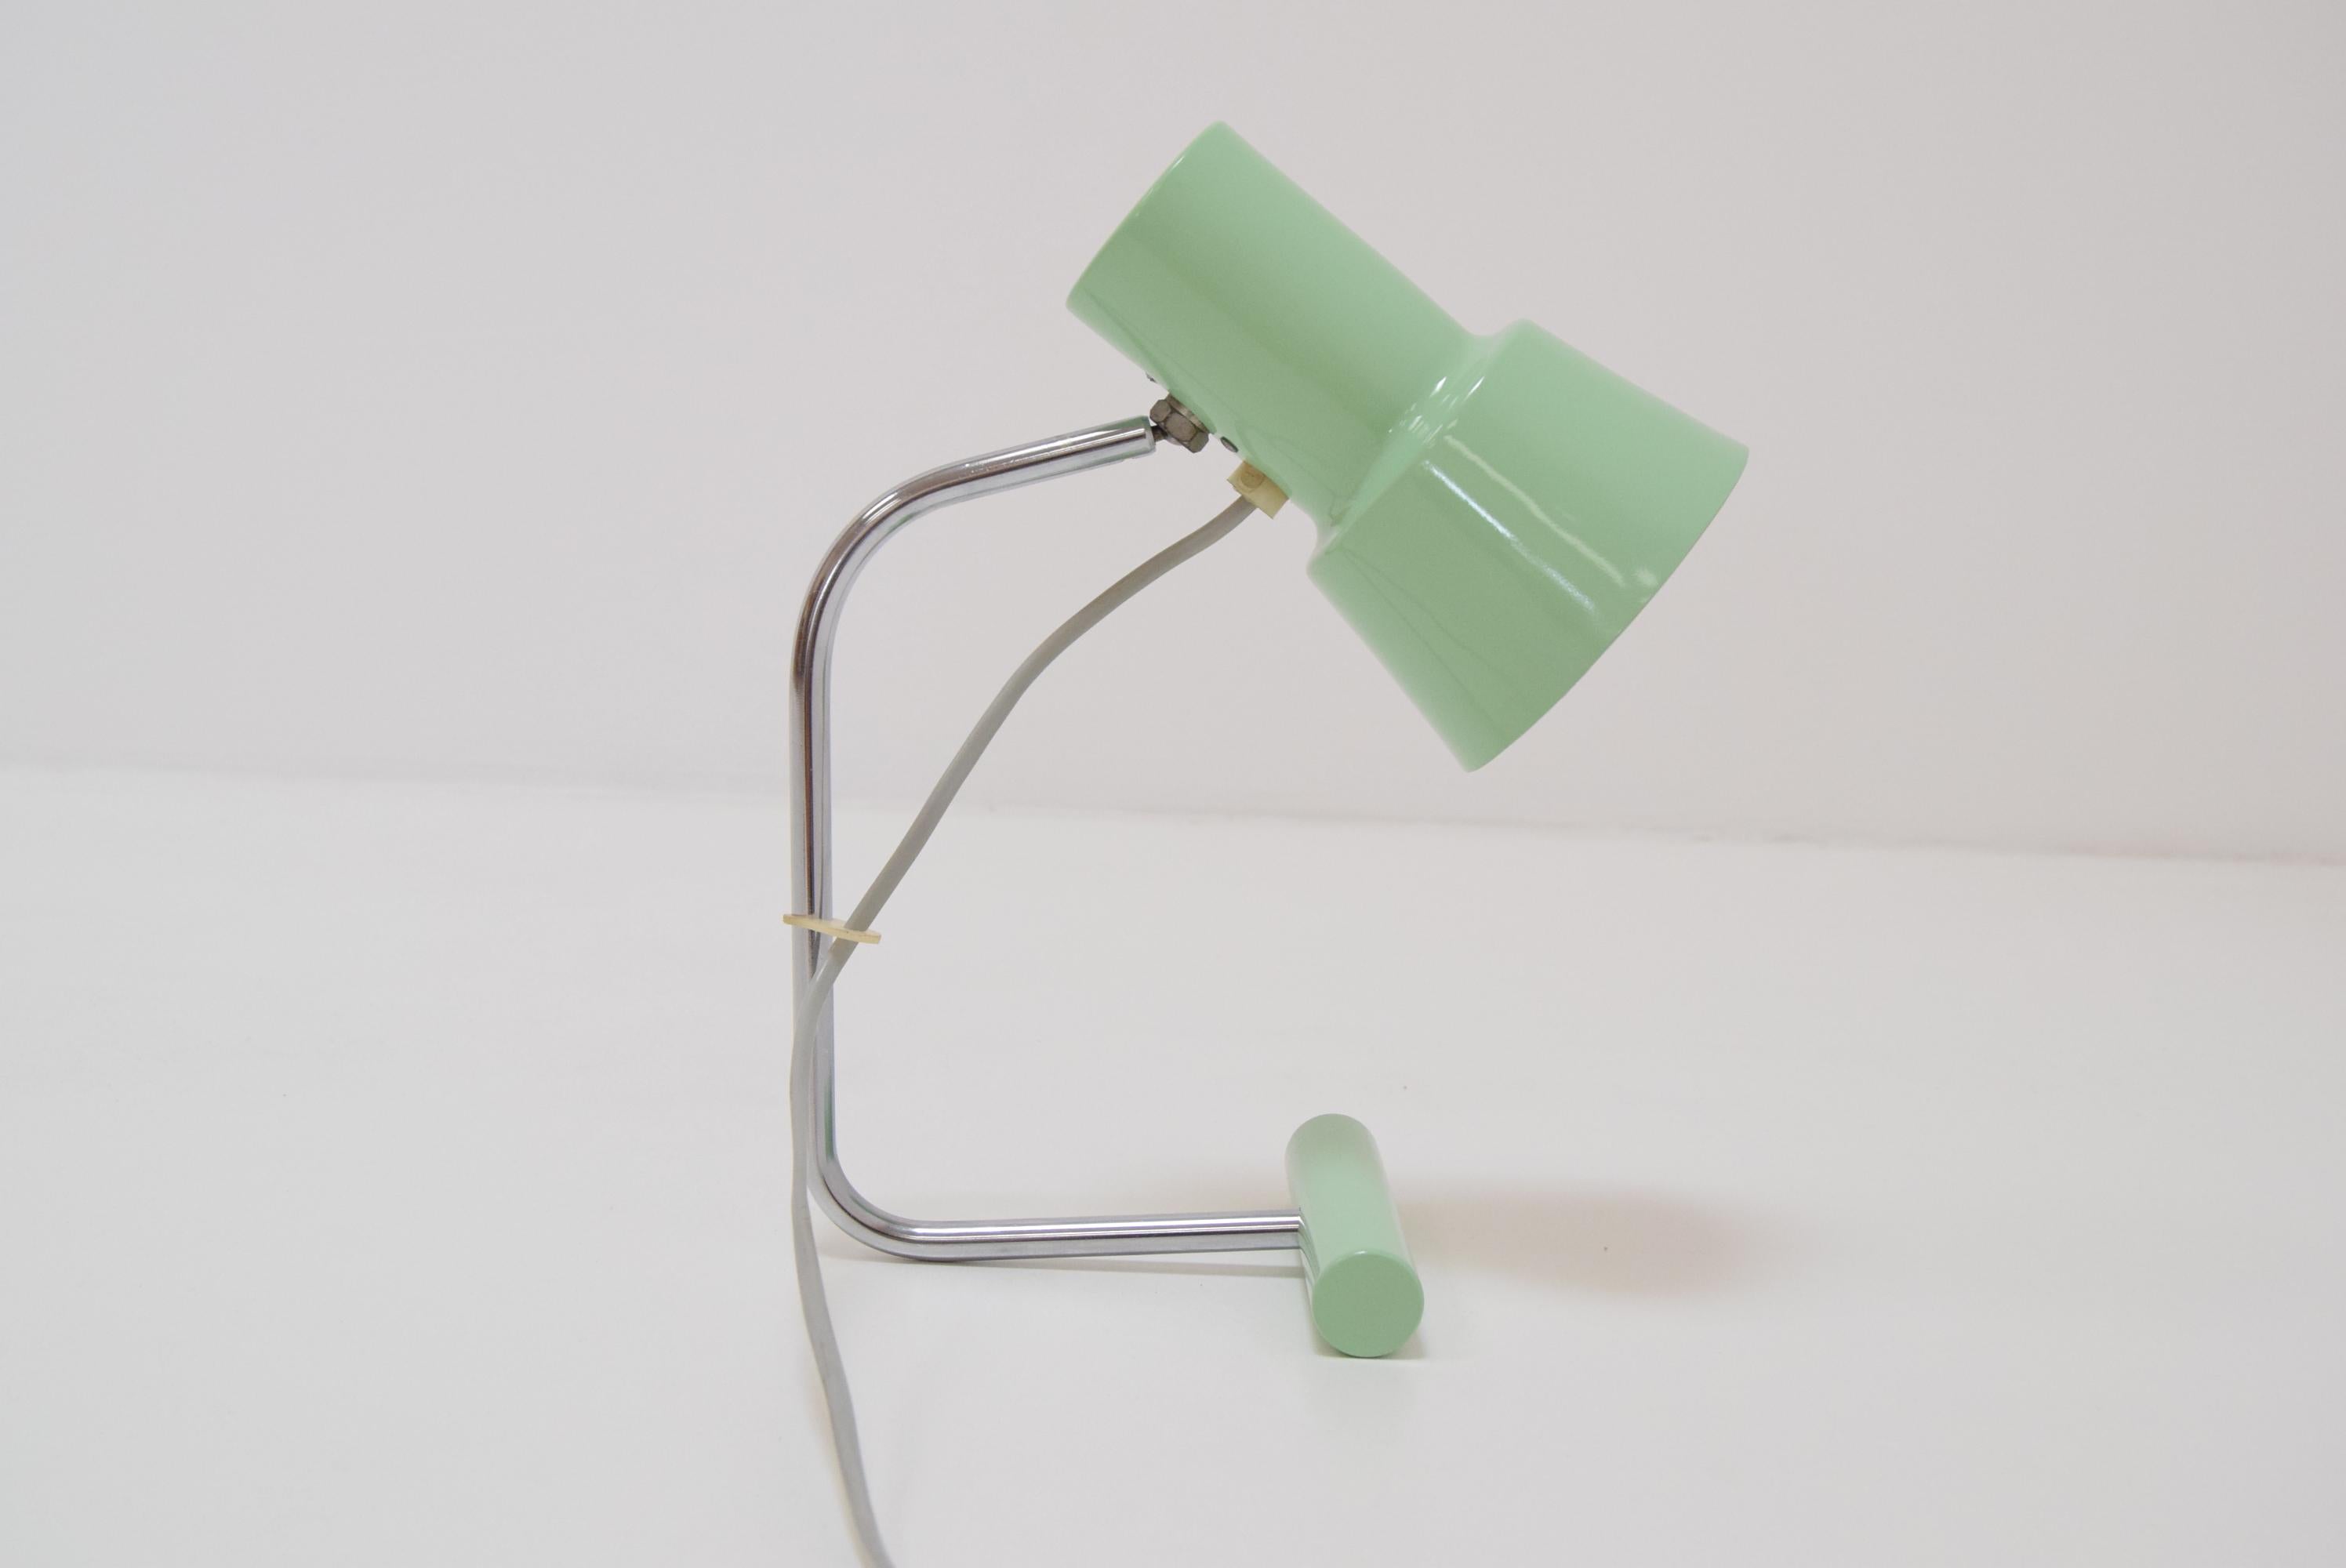 Czech Small Midcentury Table Lamp by Josef Hurka for Napako, 1970s